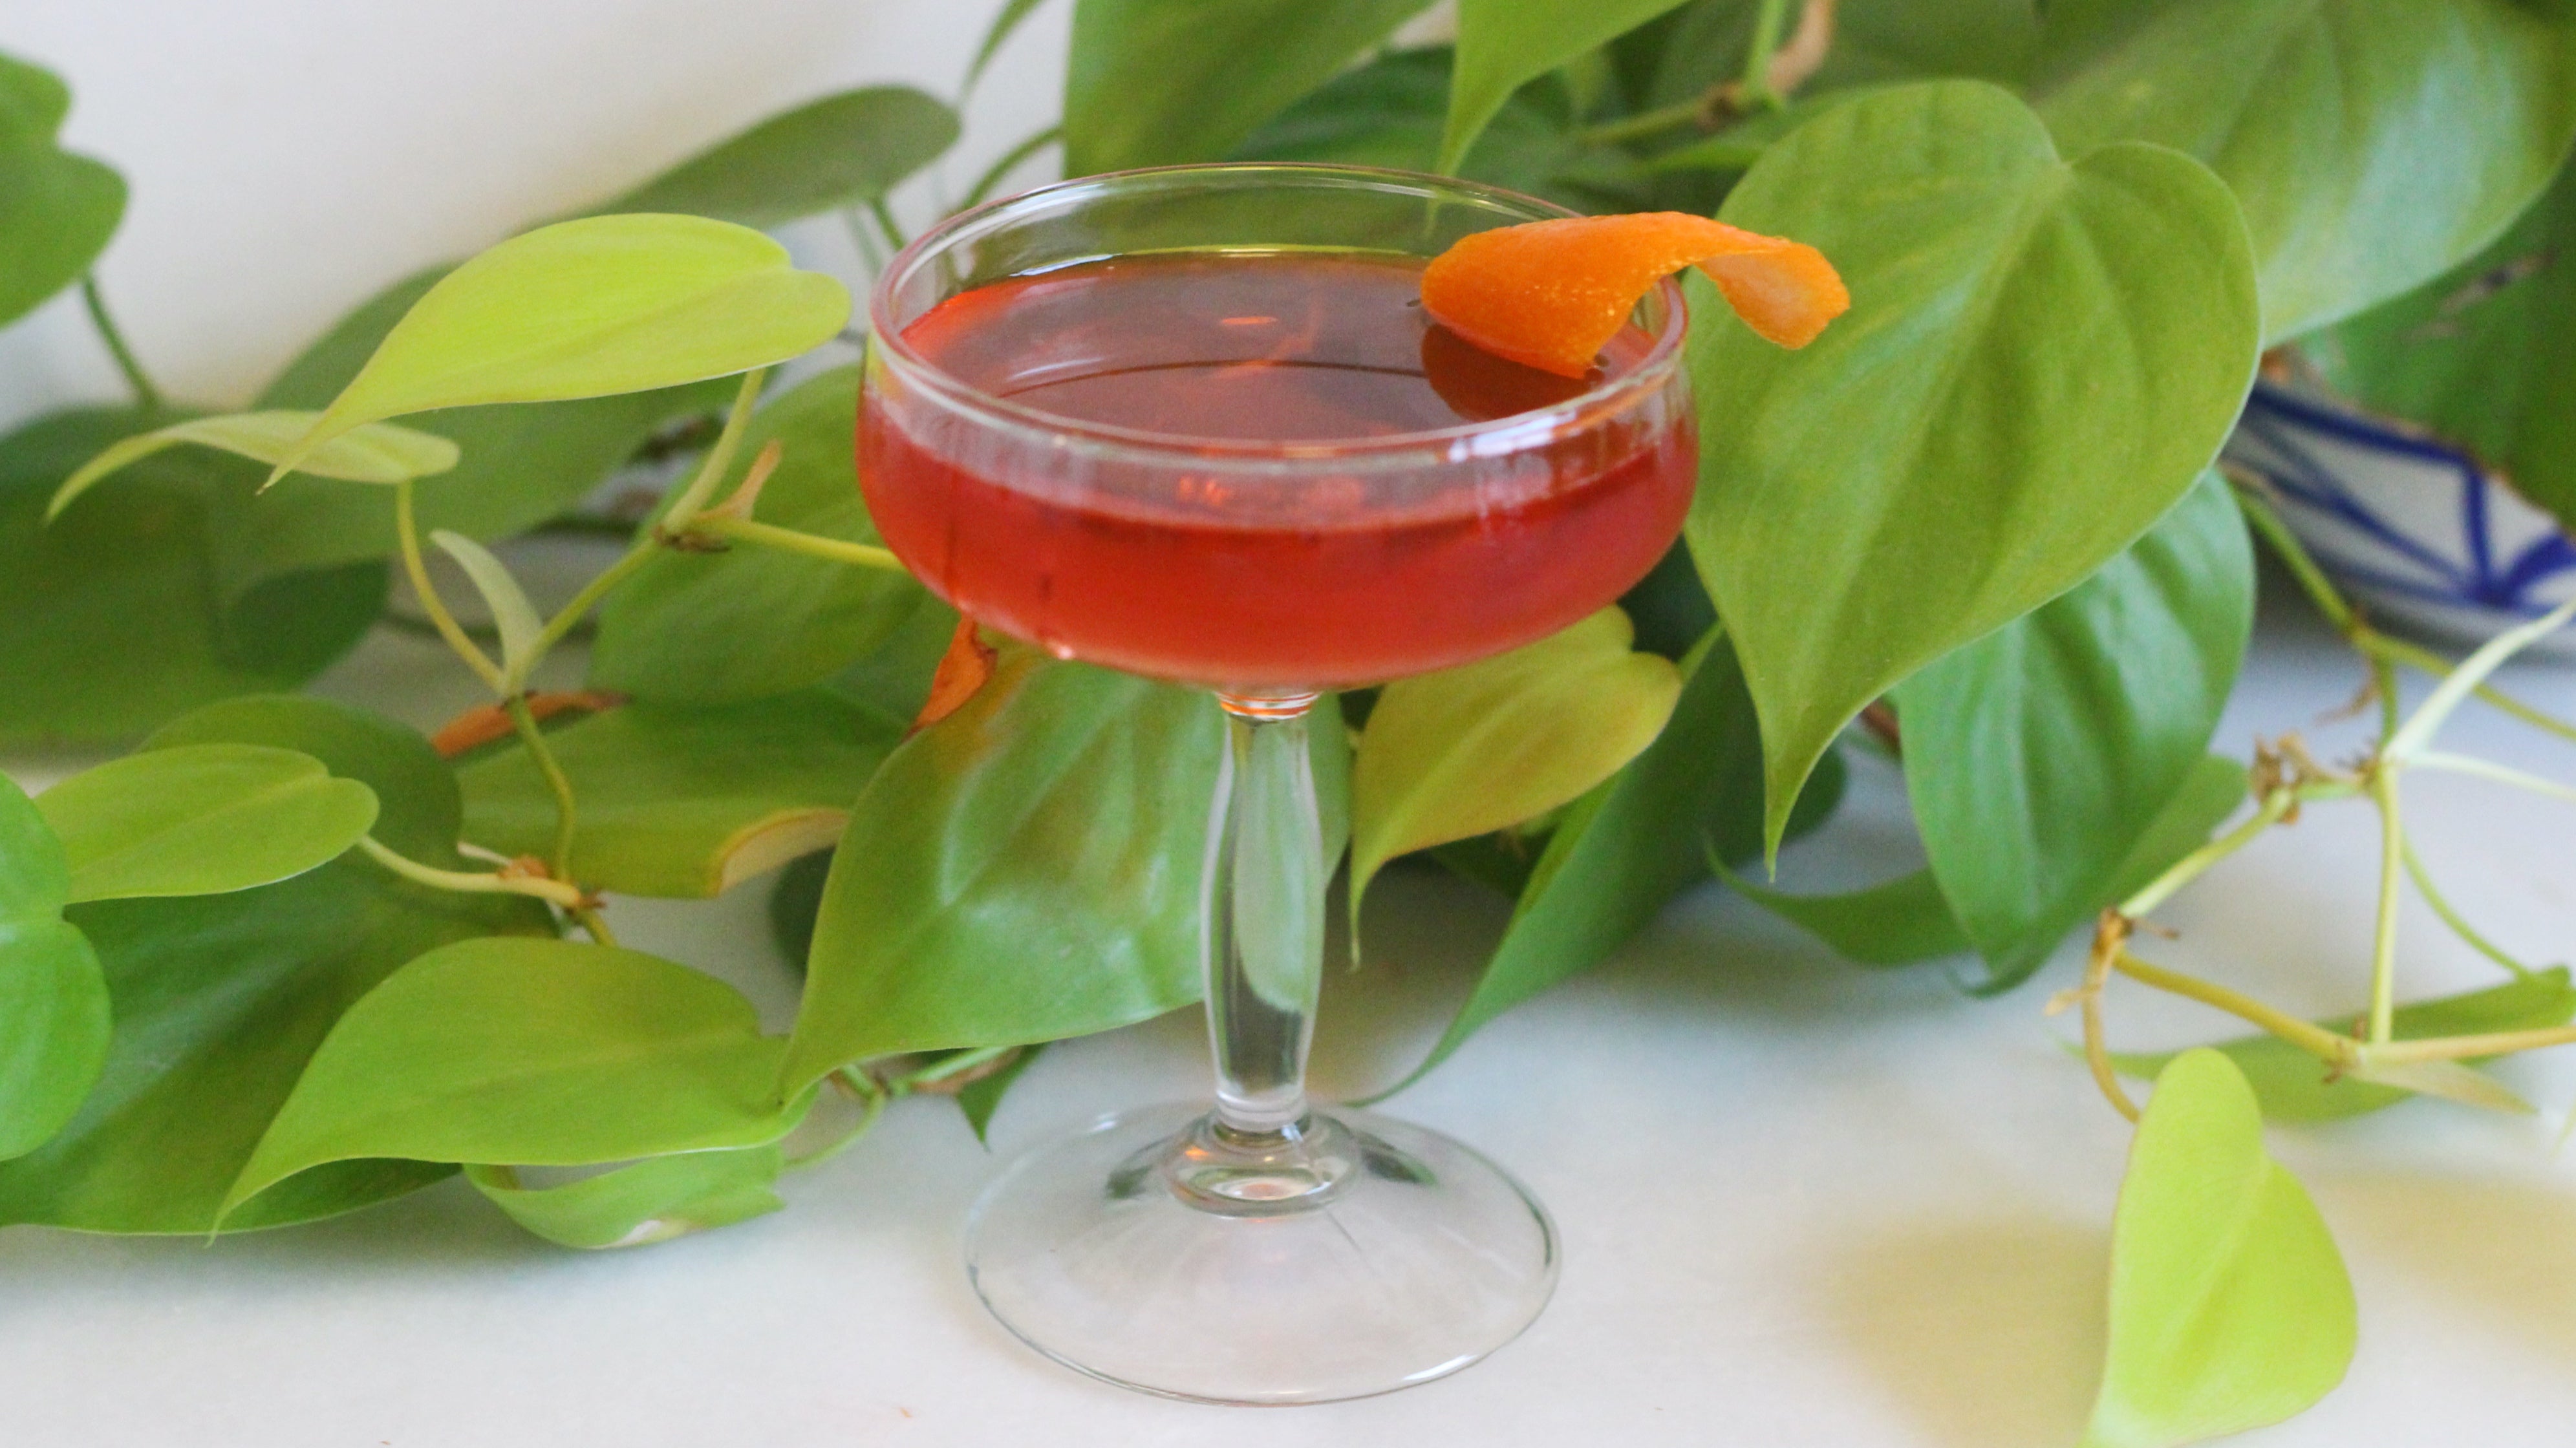 Get Acquainted With An ‘Old Pal’ Cocktail